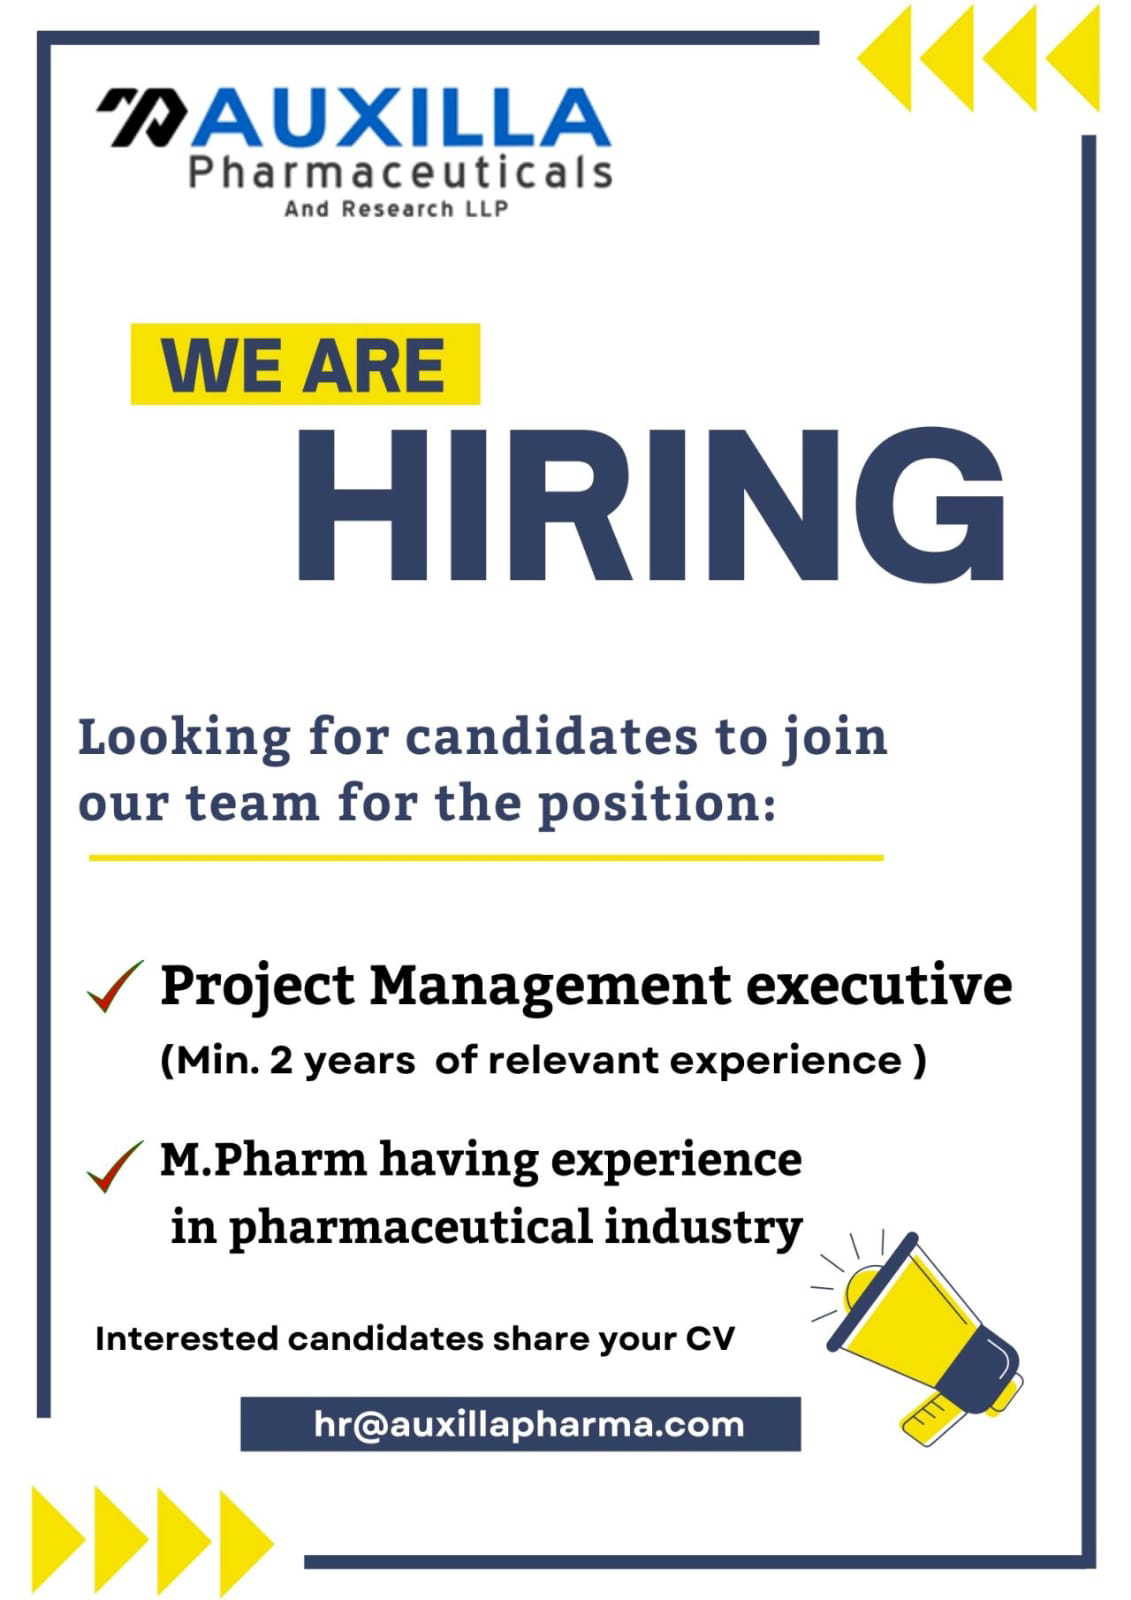 Job Available's for Auxilla Pharmaceuticals and Research LLP Job Vacancy for Project Management Executive